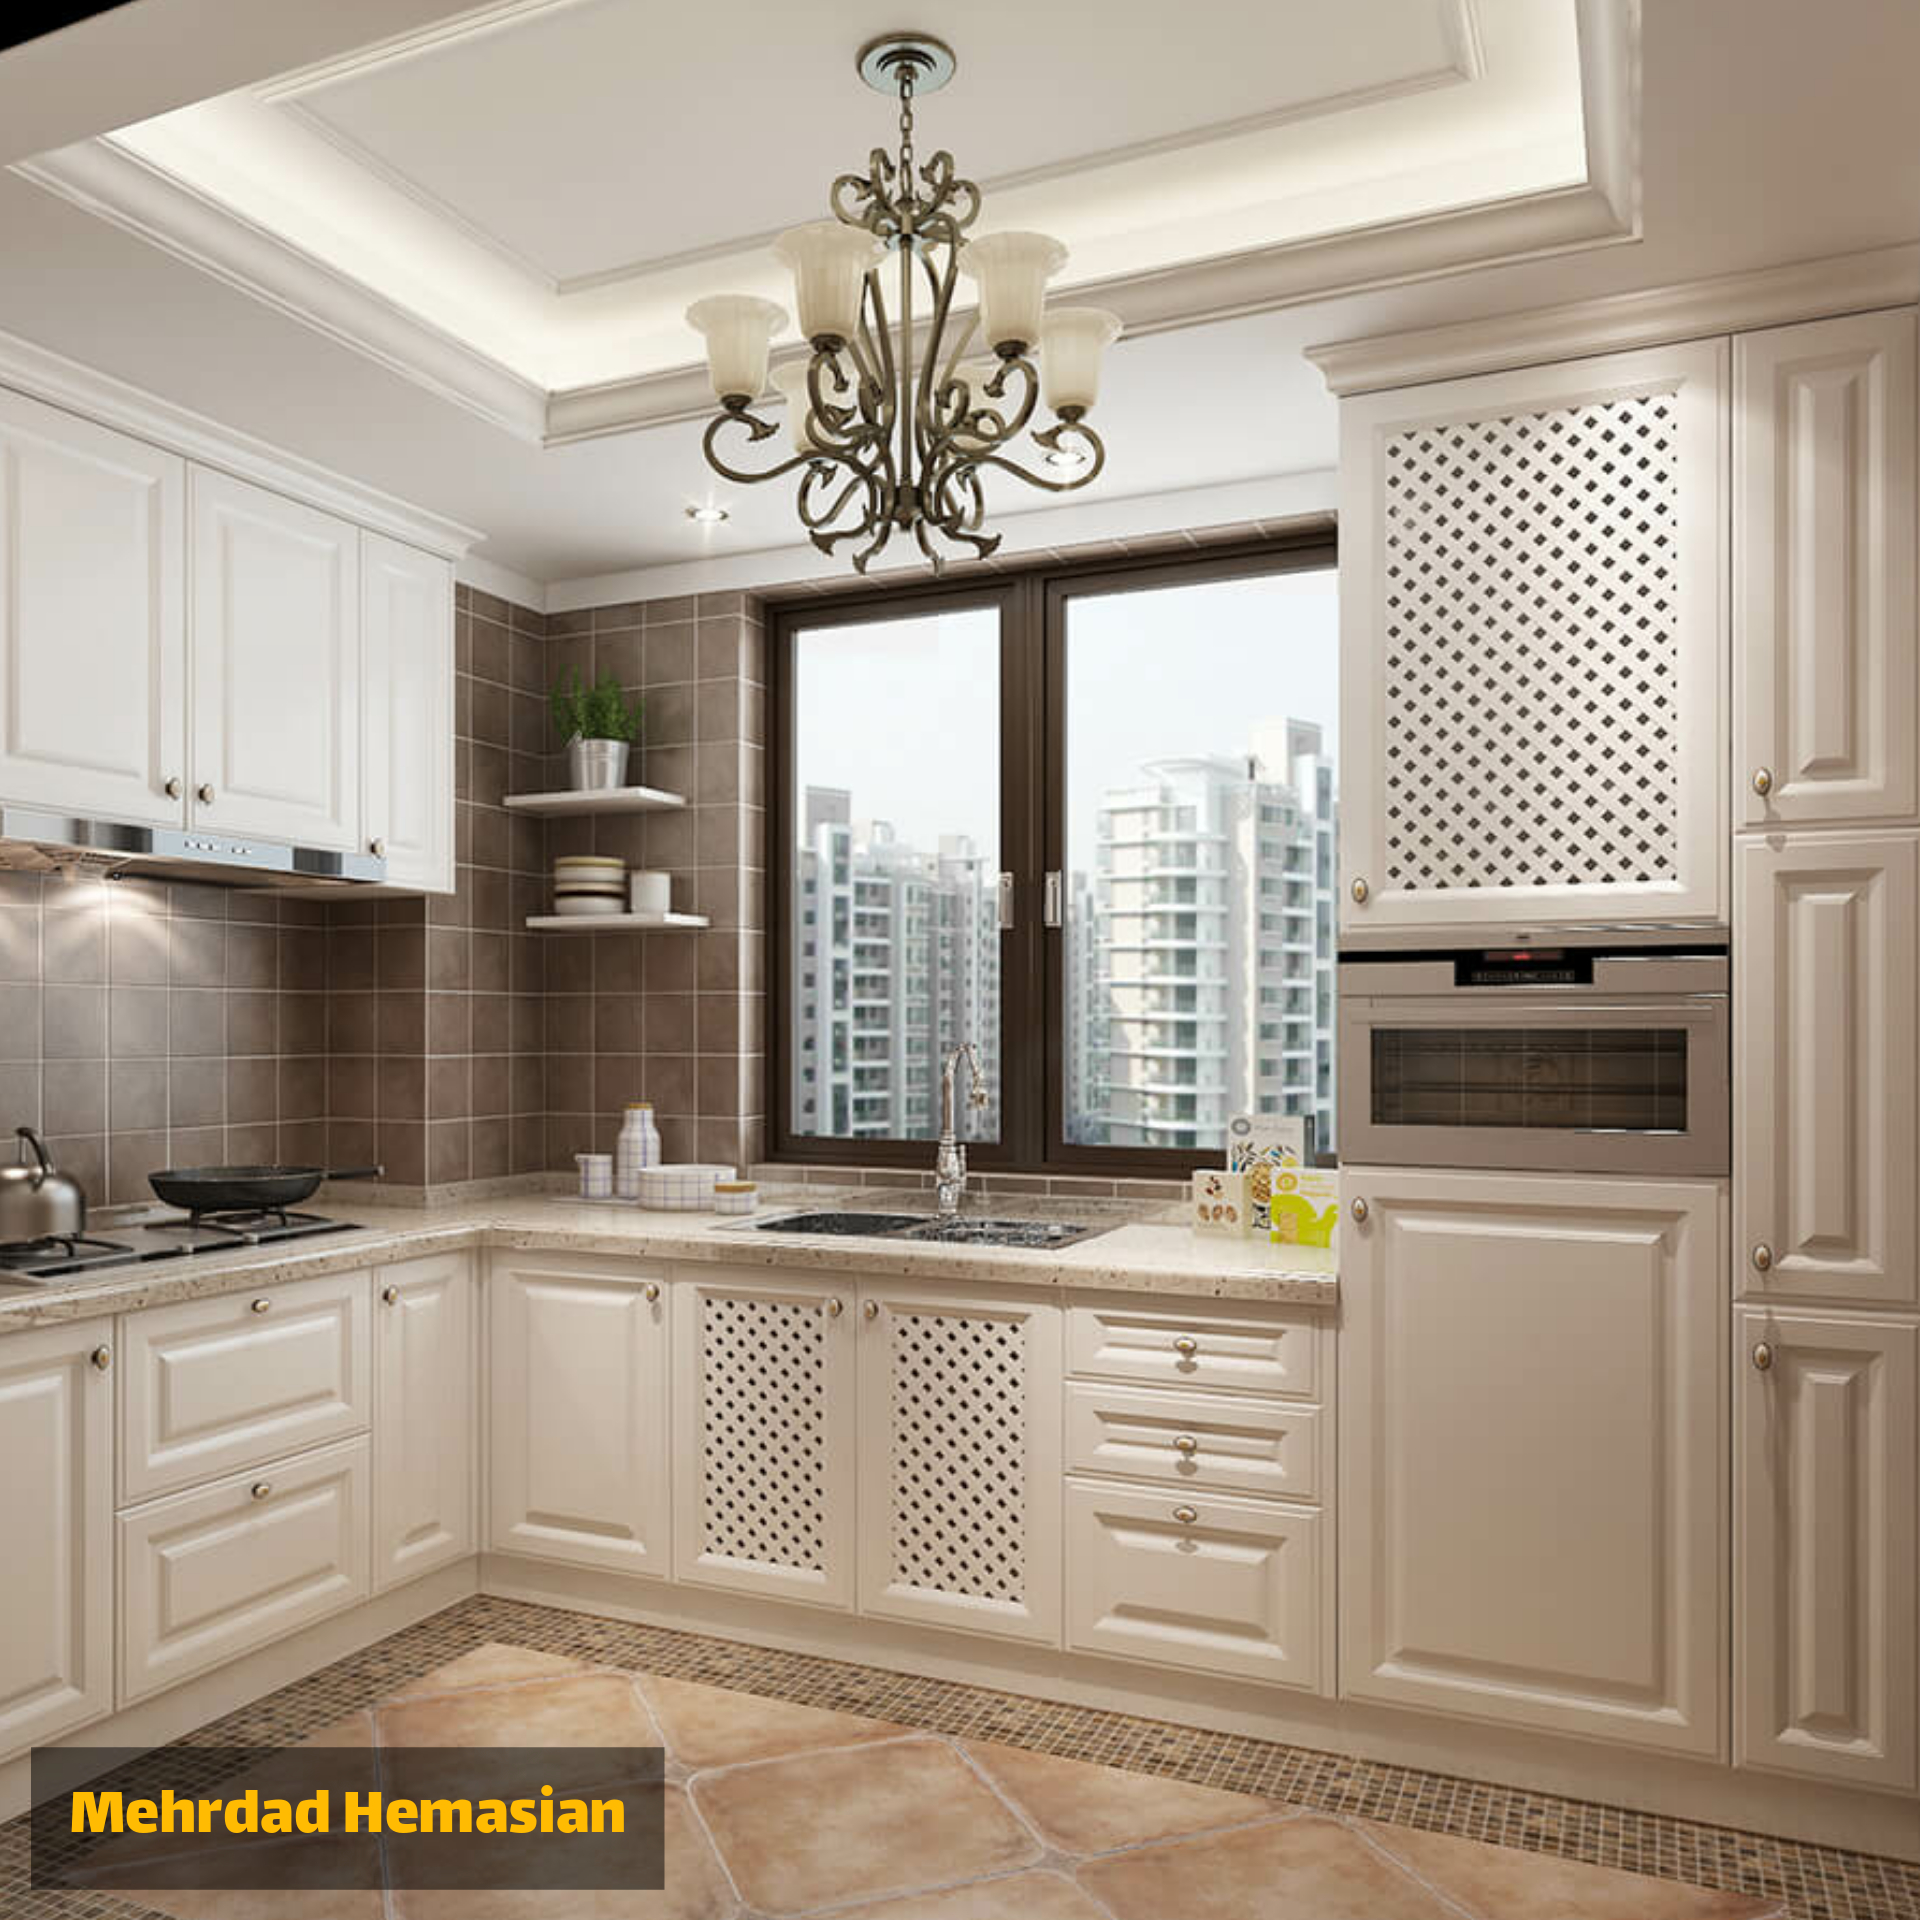 Use of membrane cabinets for classic and neoclassical styles